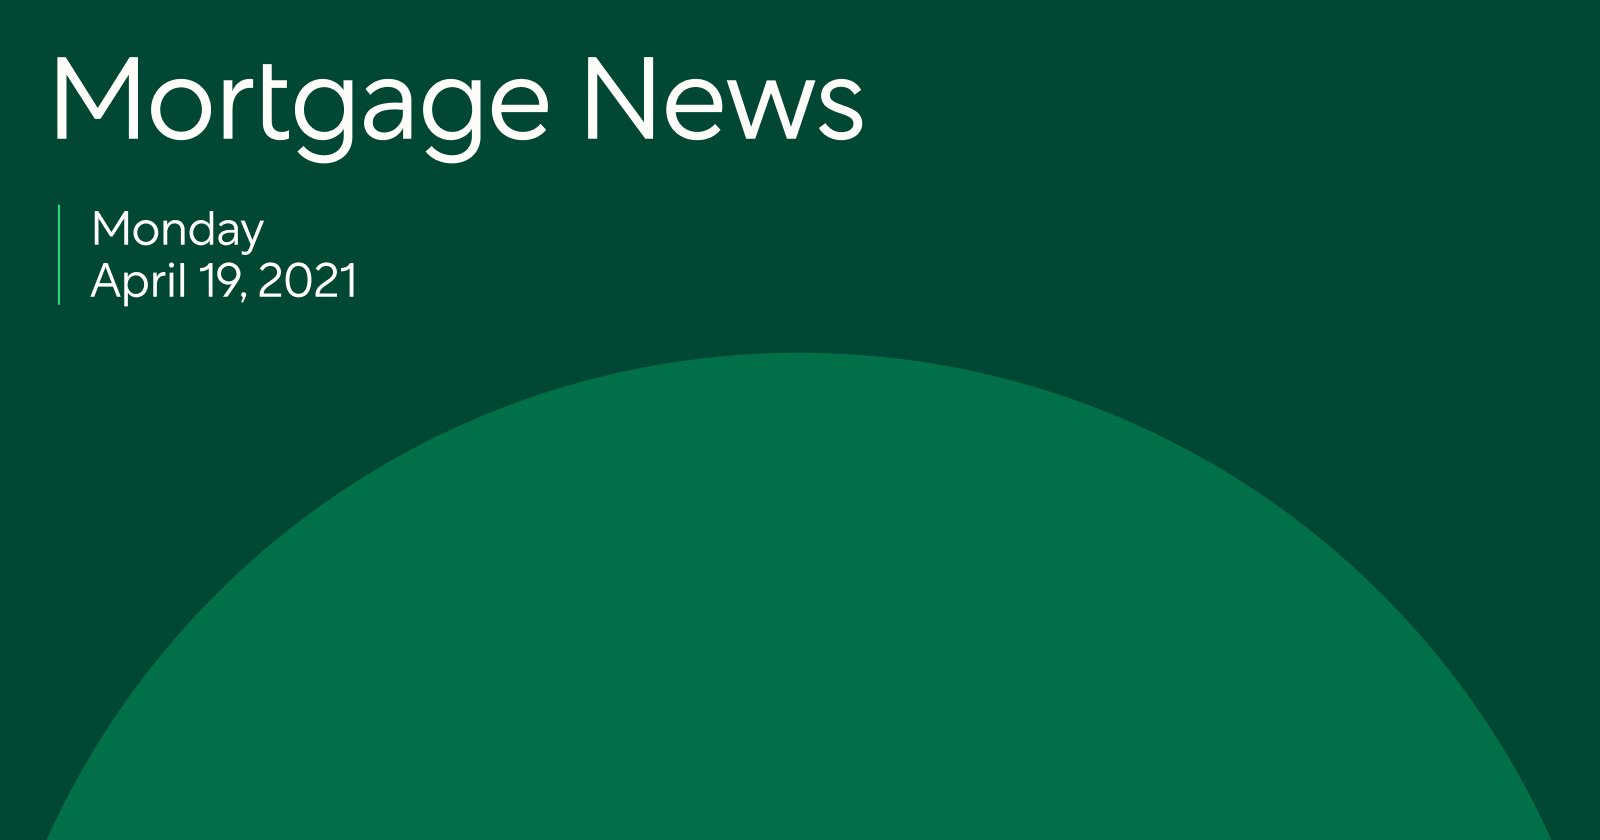 Mortgage News 4/19/2021: New Developments Are Going Up At A Record Pace